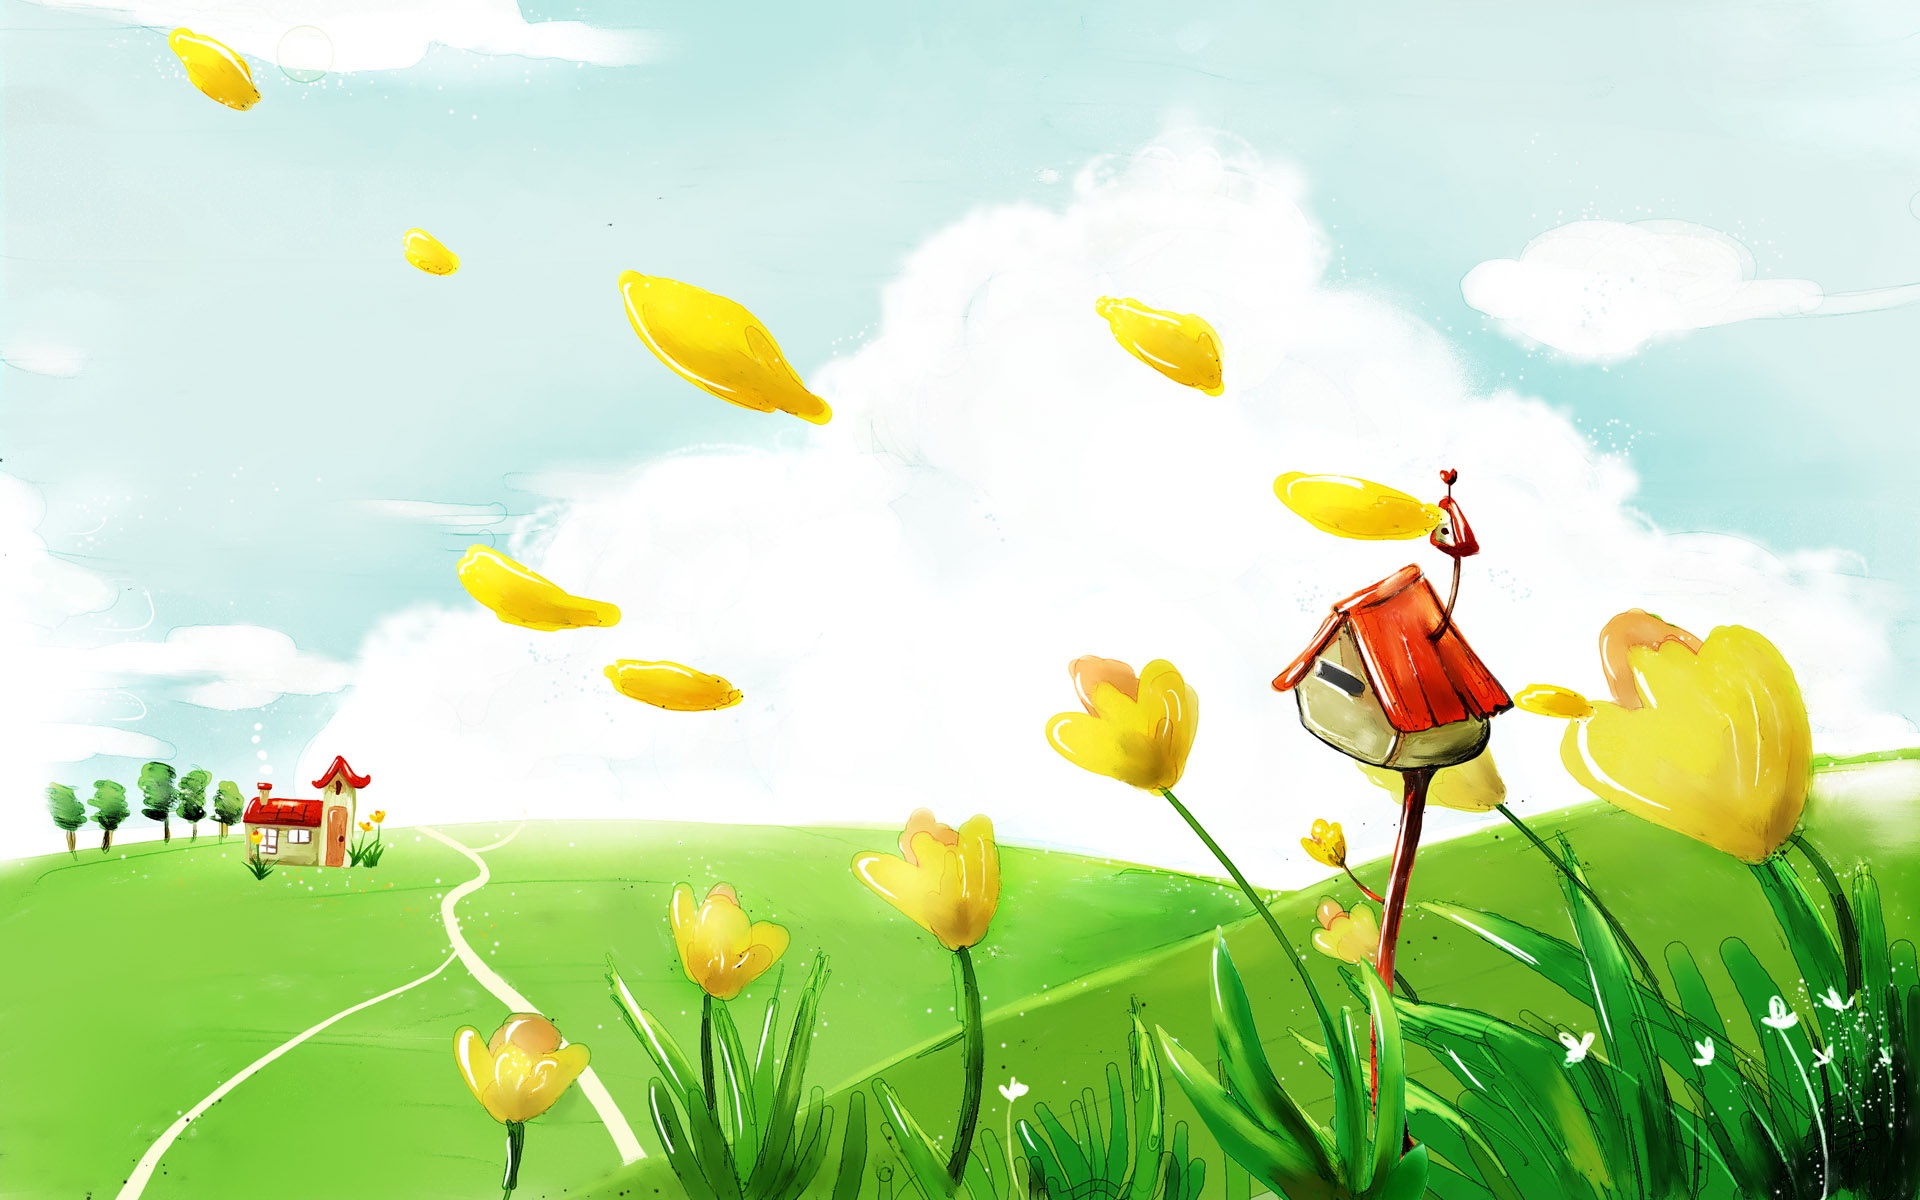 sweet home for kids play photo in 1080p desktop background wallpapers